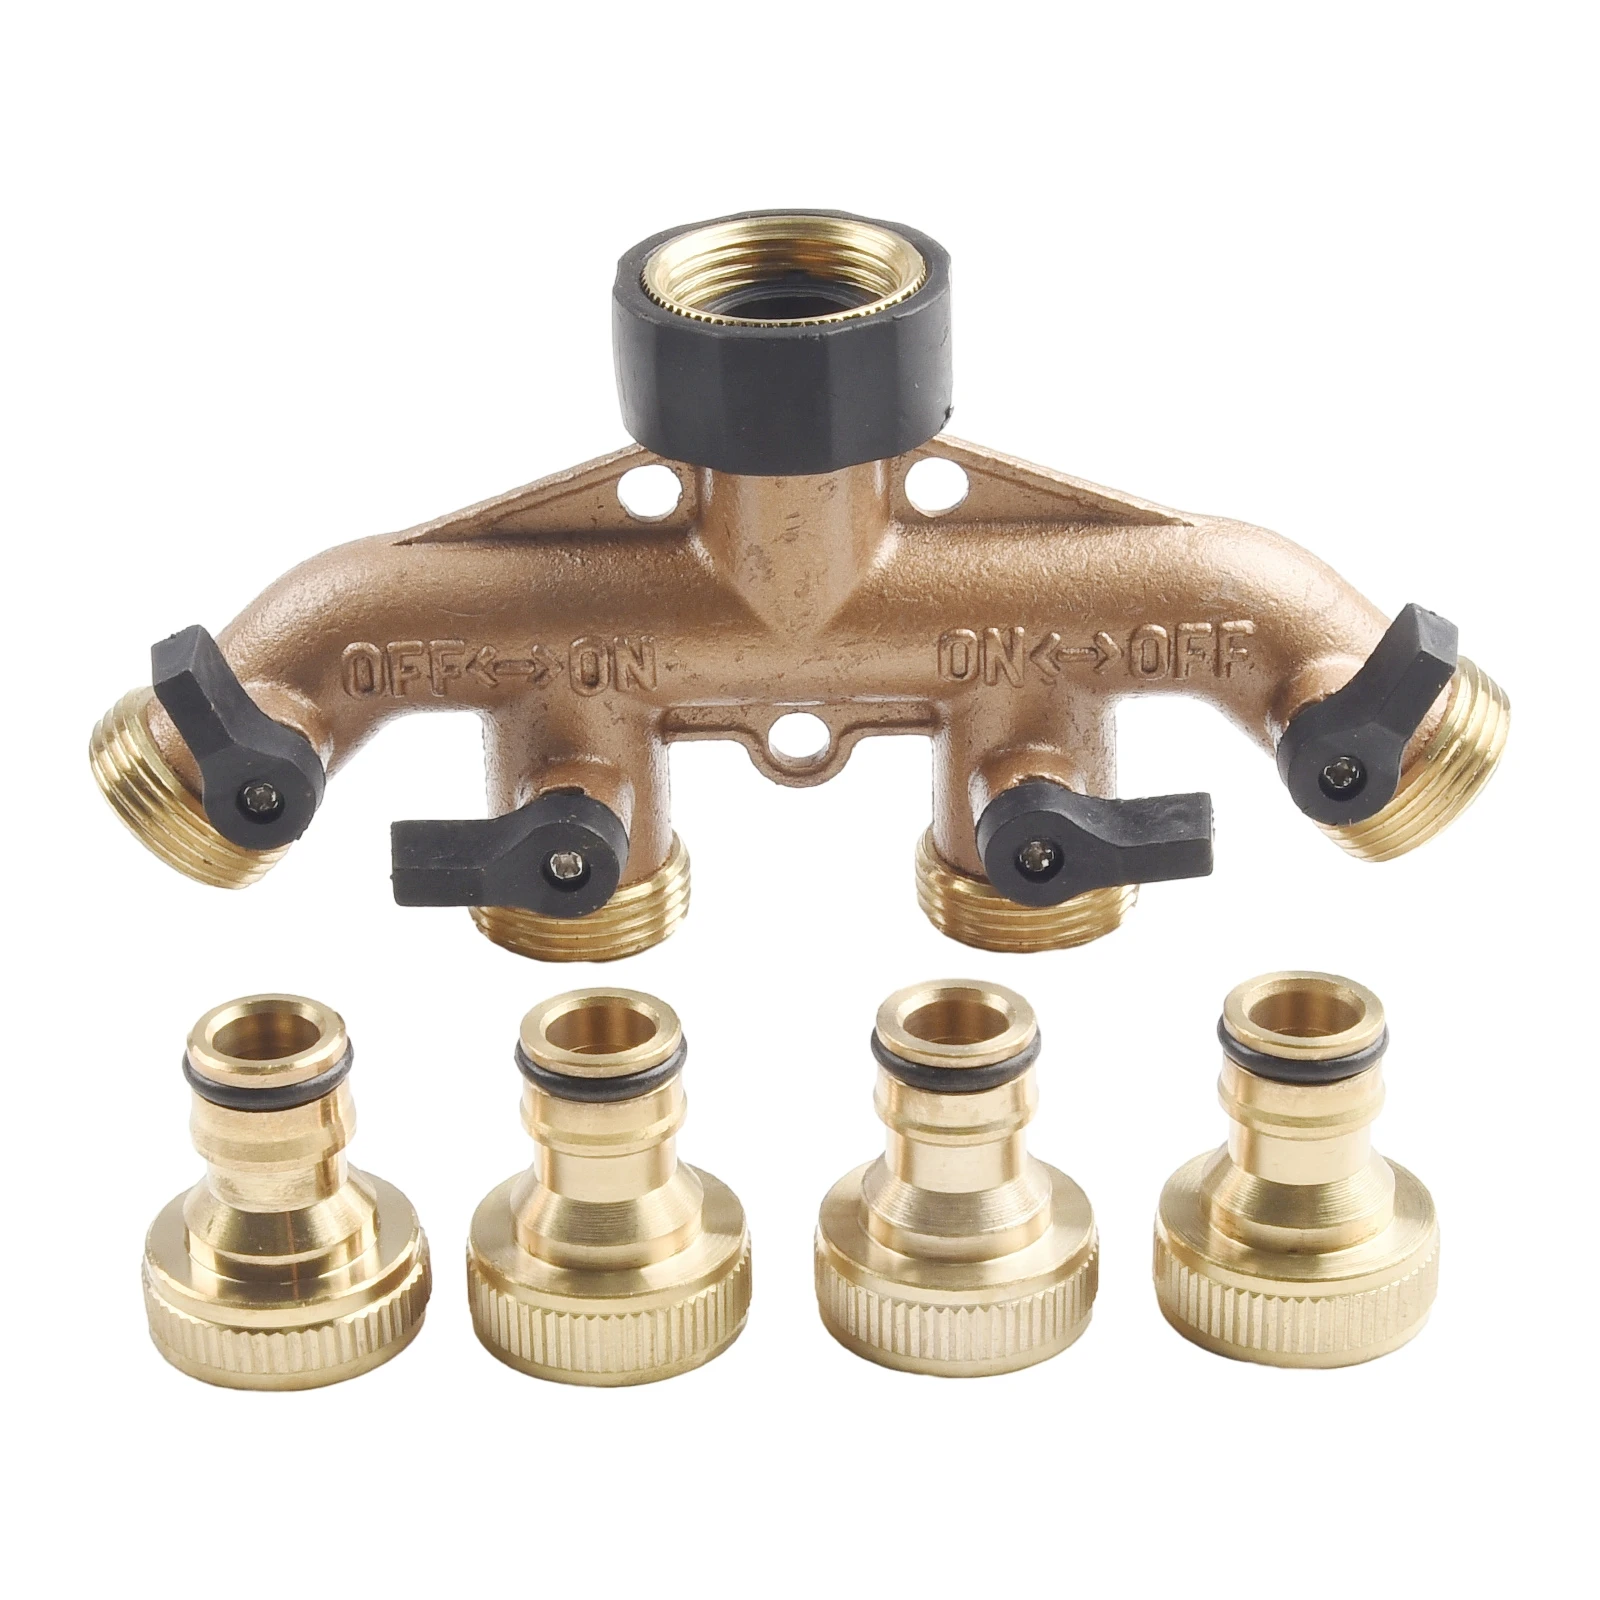 

4 Way Solid Brass Nipple Hose Splitter Connector With Shut Off Valves 3/4inch For Agriculture Lawn Garden